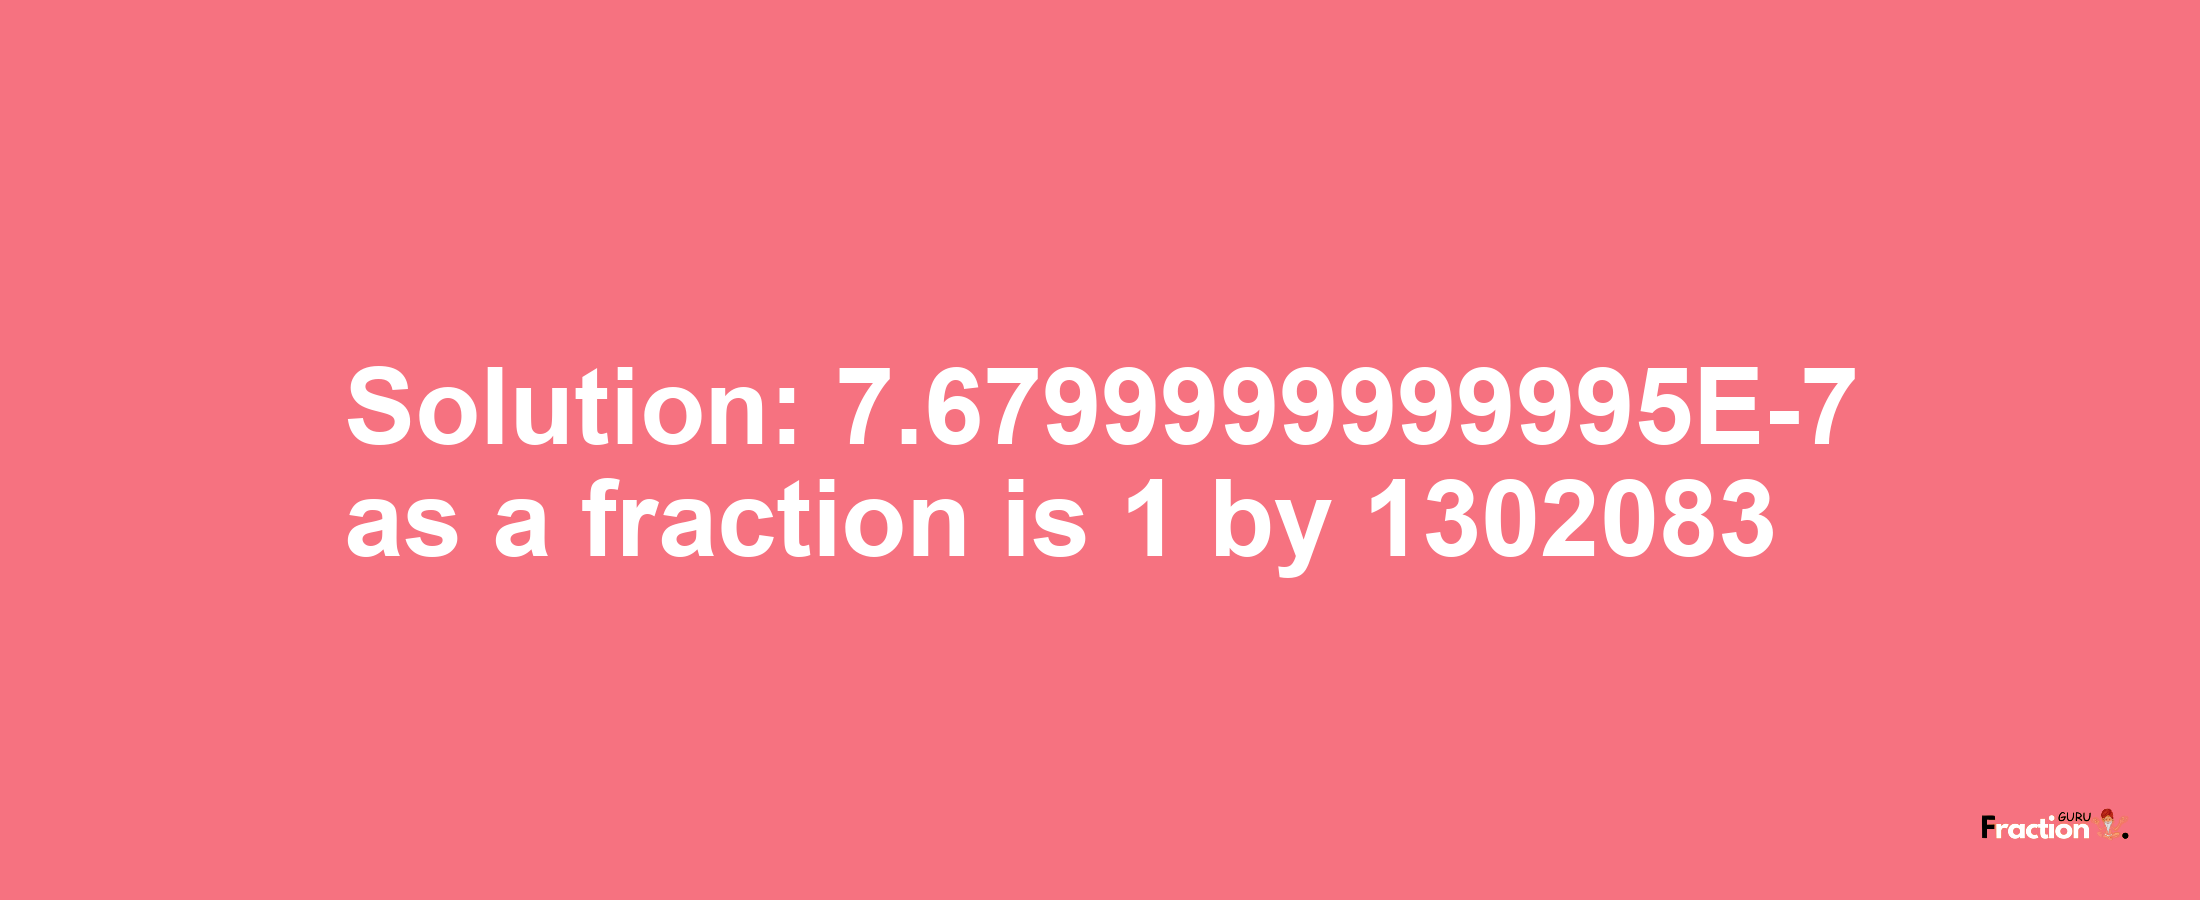 Solution:7.6799999999995E-7 as a fraction is 1/1302083